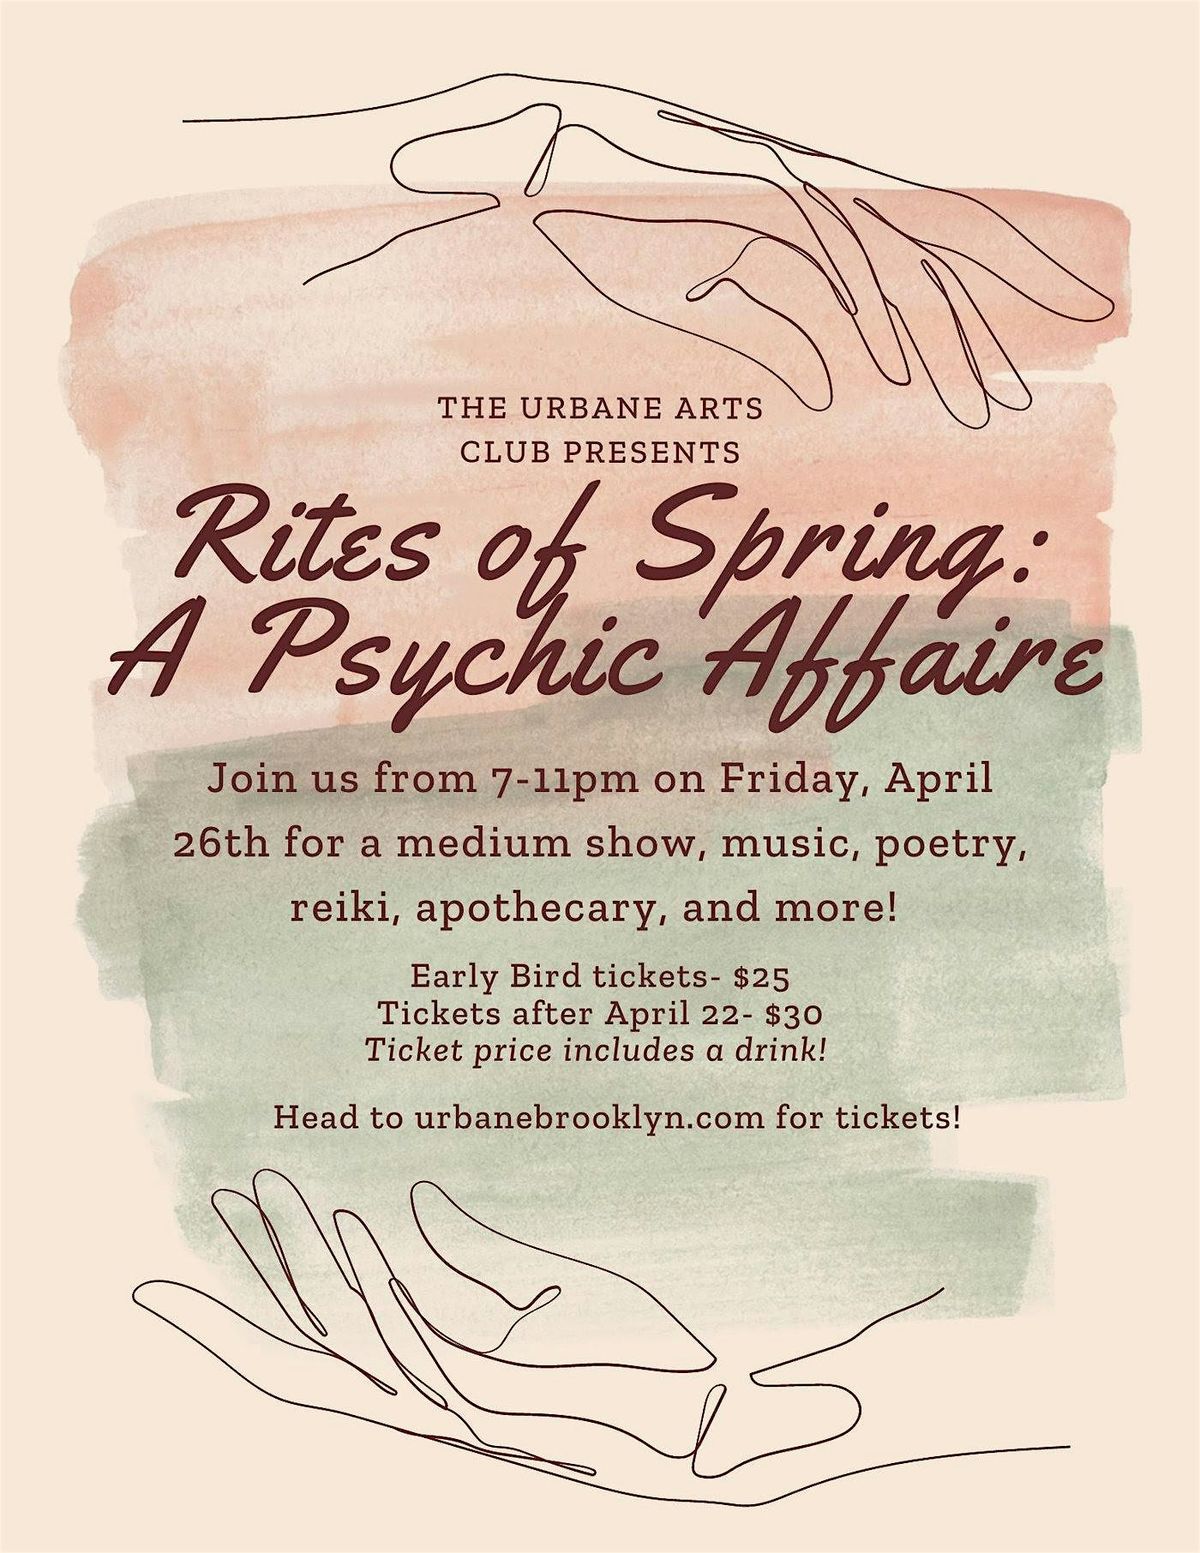 "Rites of Spring: A Psychic Affaire"